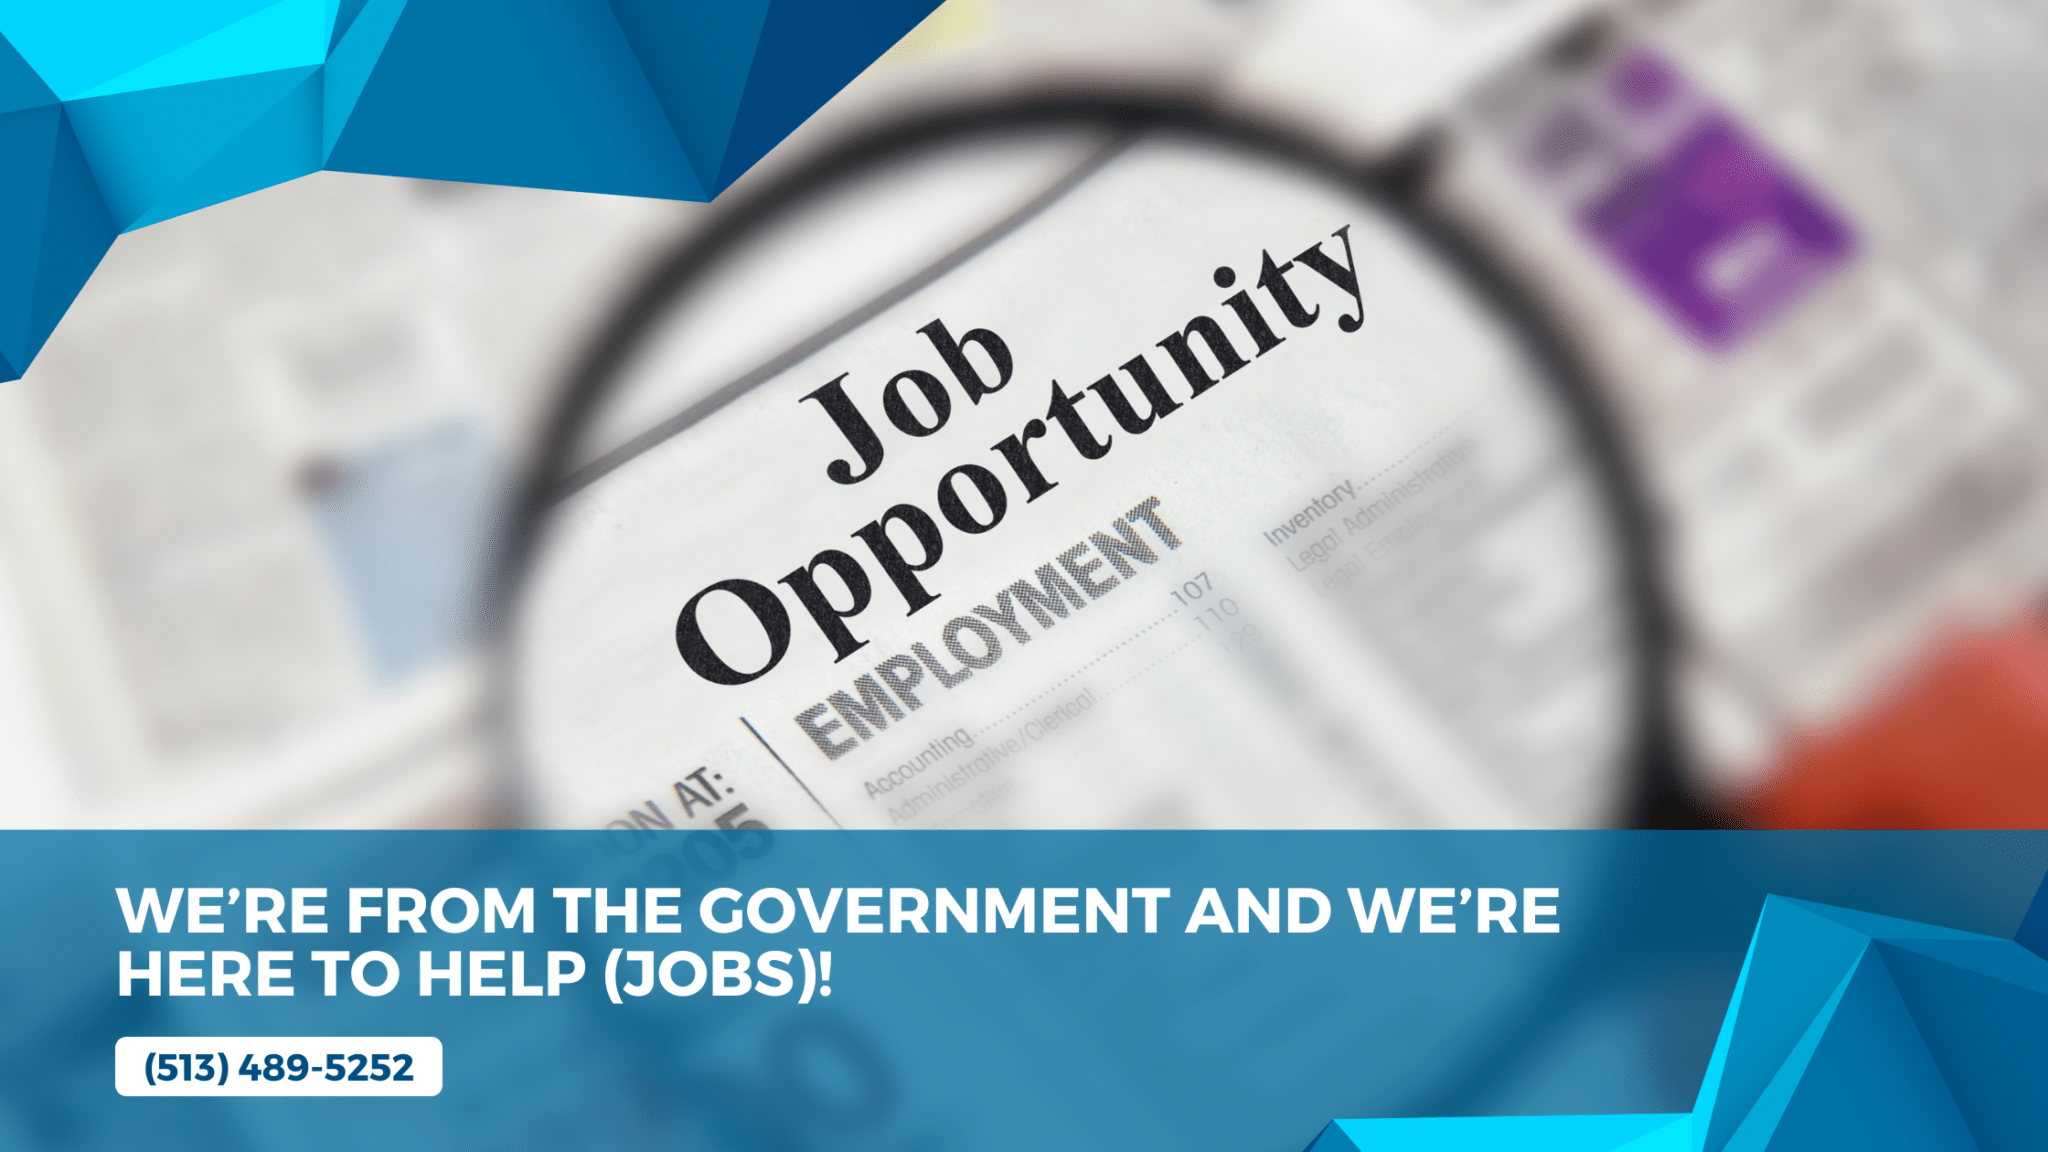 We’re from the Government and we’re here to help (jobs)!